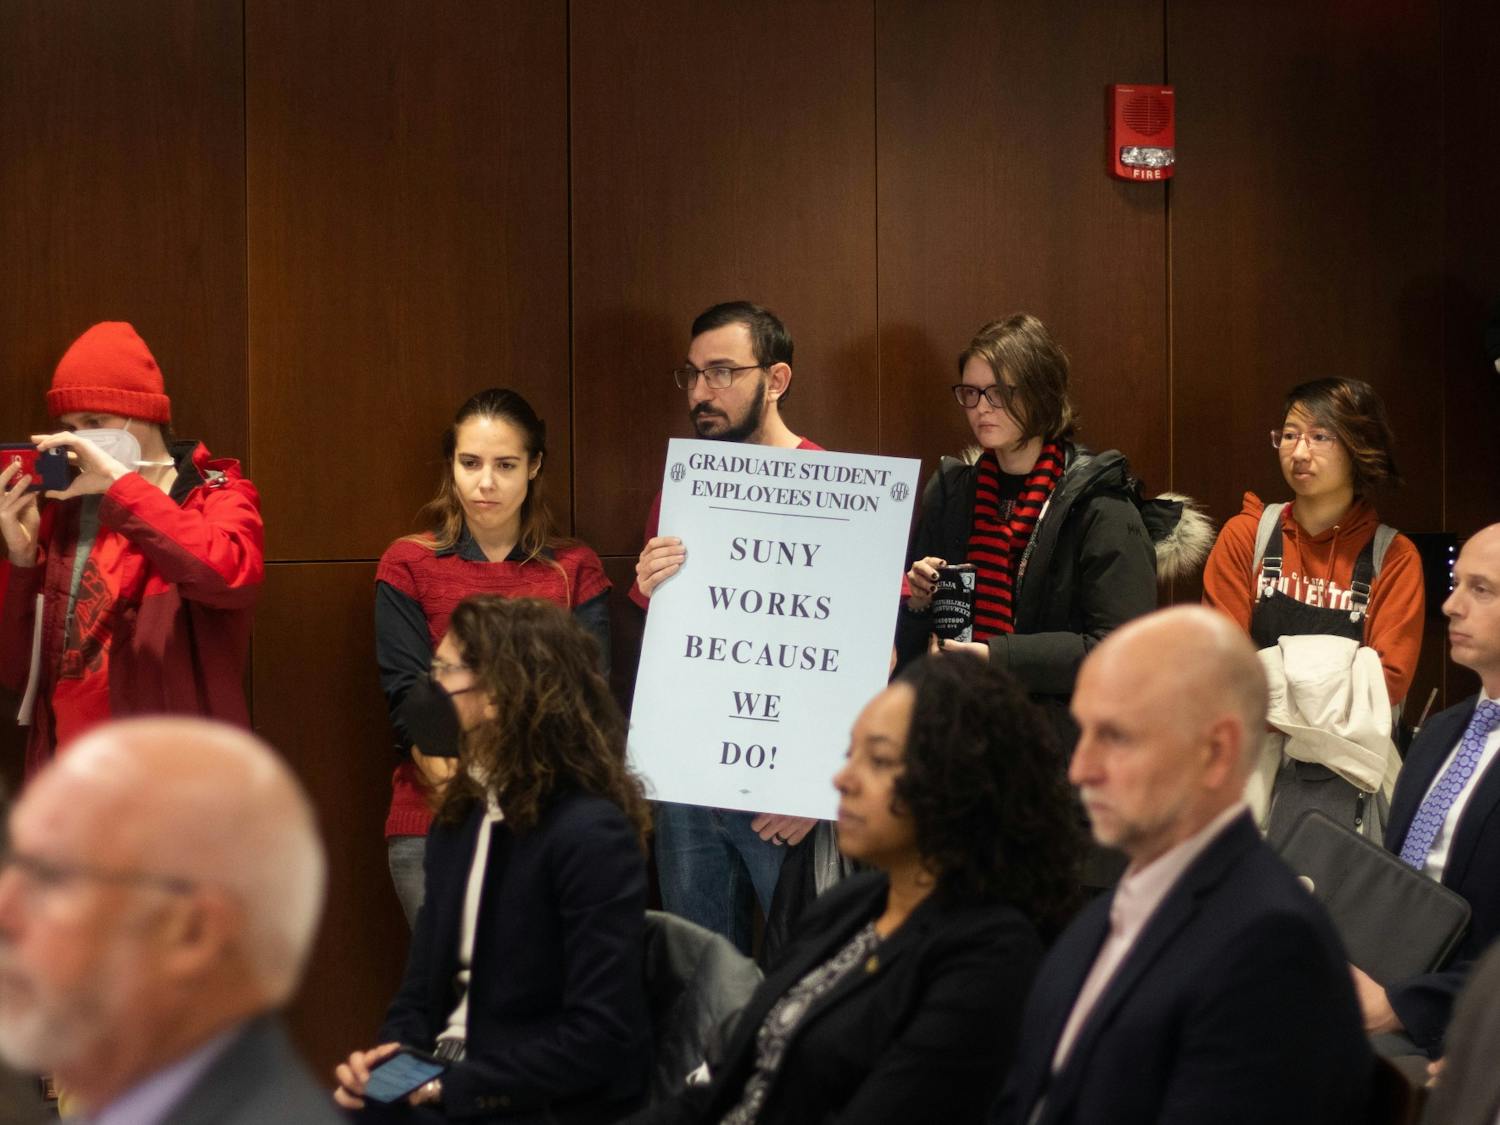 Graduate students protested for higher stipends at the UB Council meeting in the Buffalo Room this past Monday.